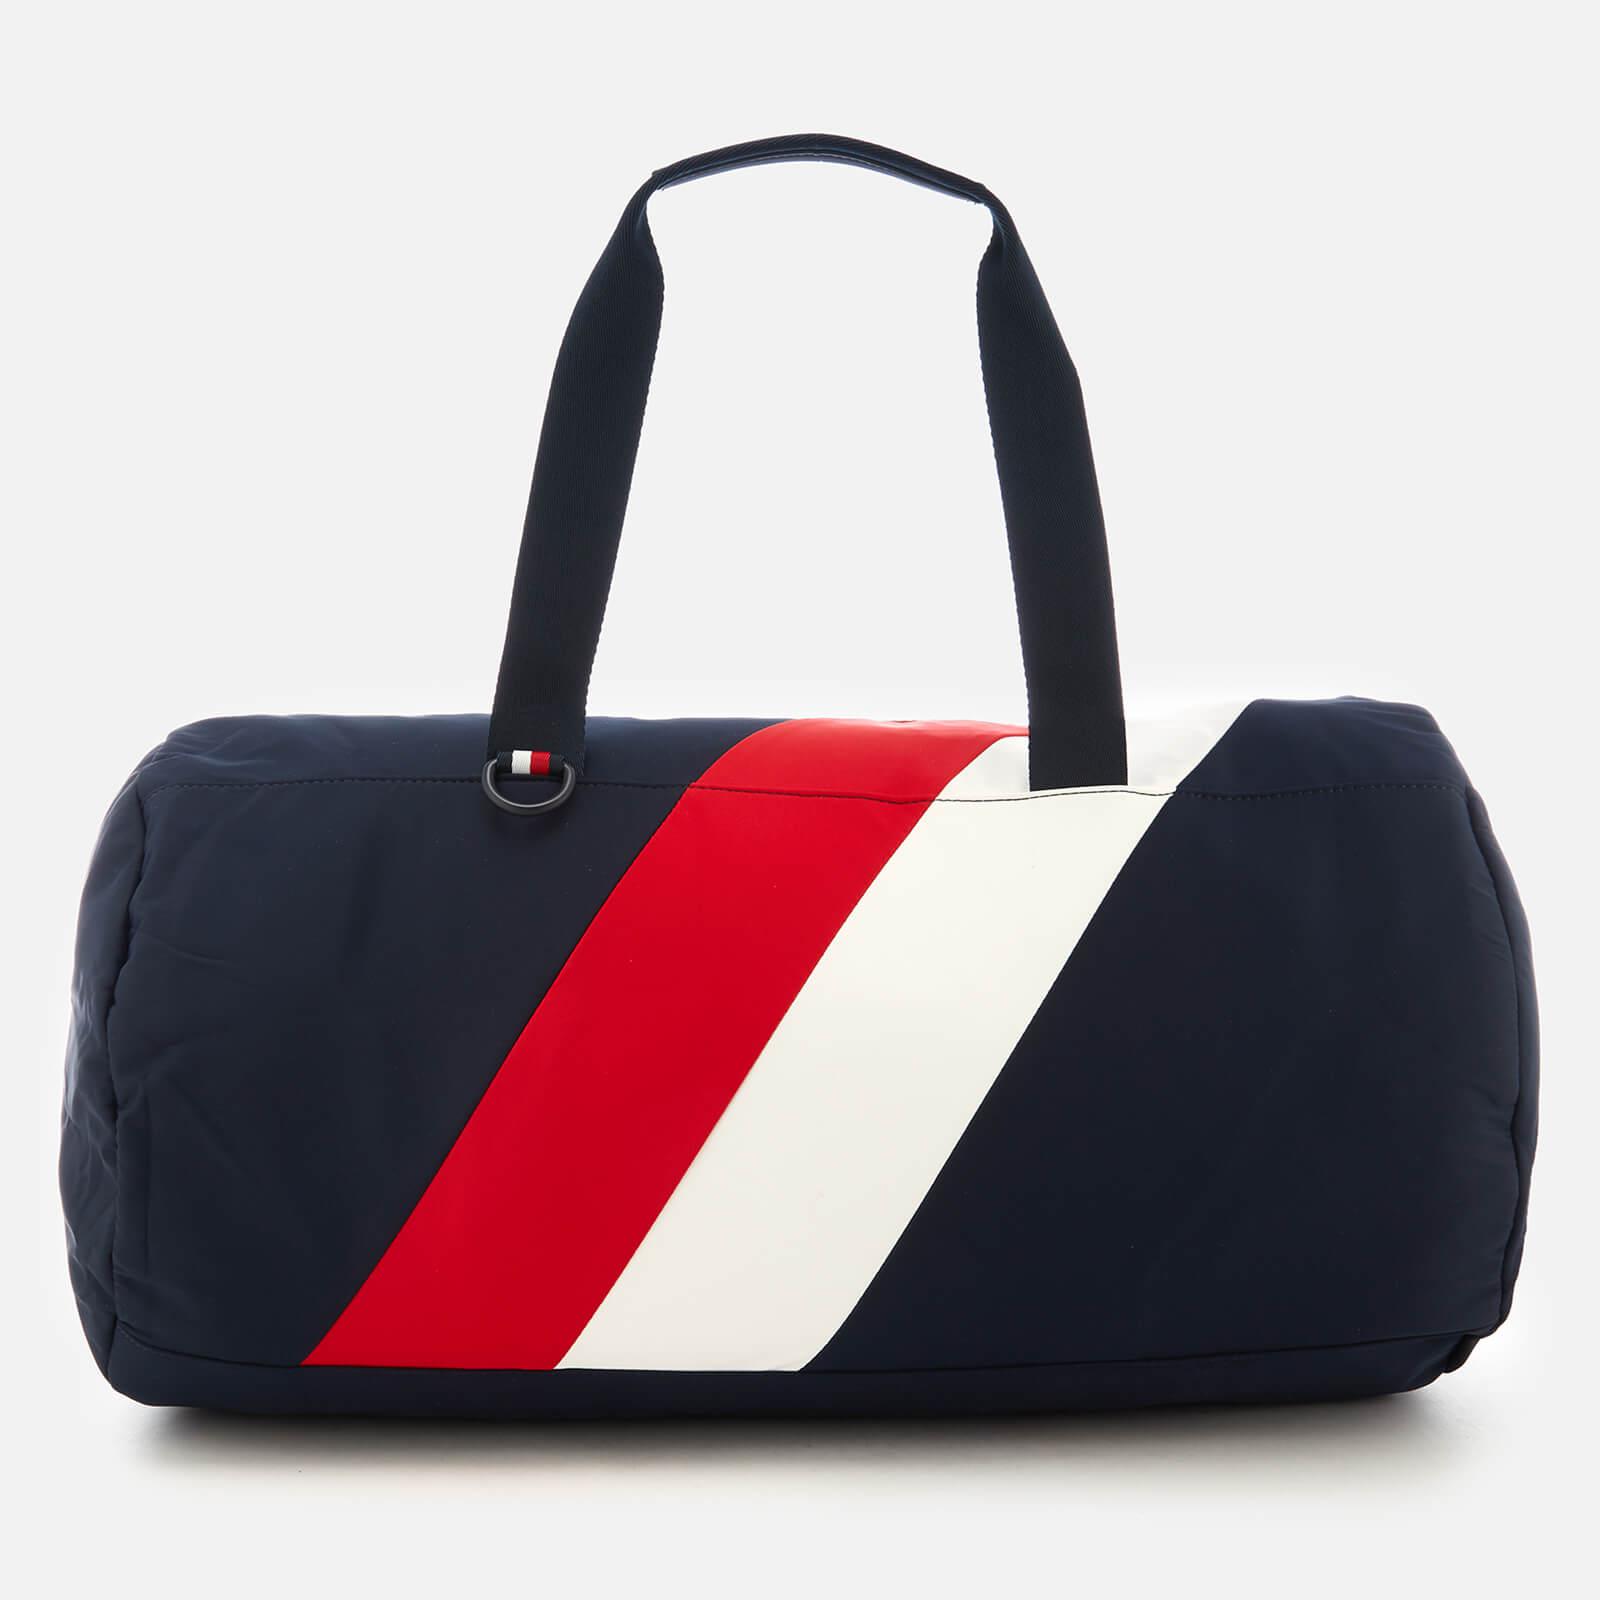 Tommy Hilfiger Handbags Outlet Canada :: Keweenaw Bay Indian Community